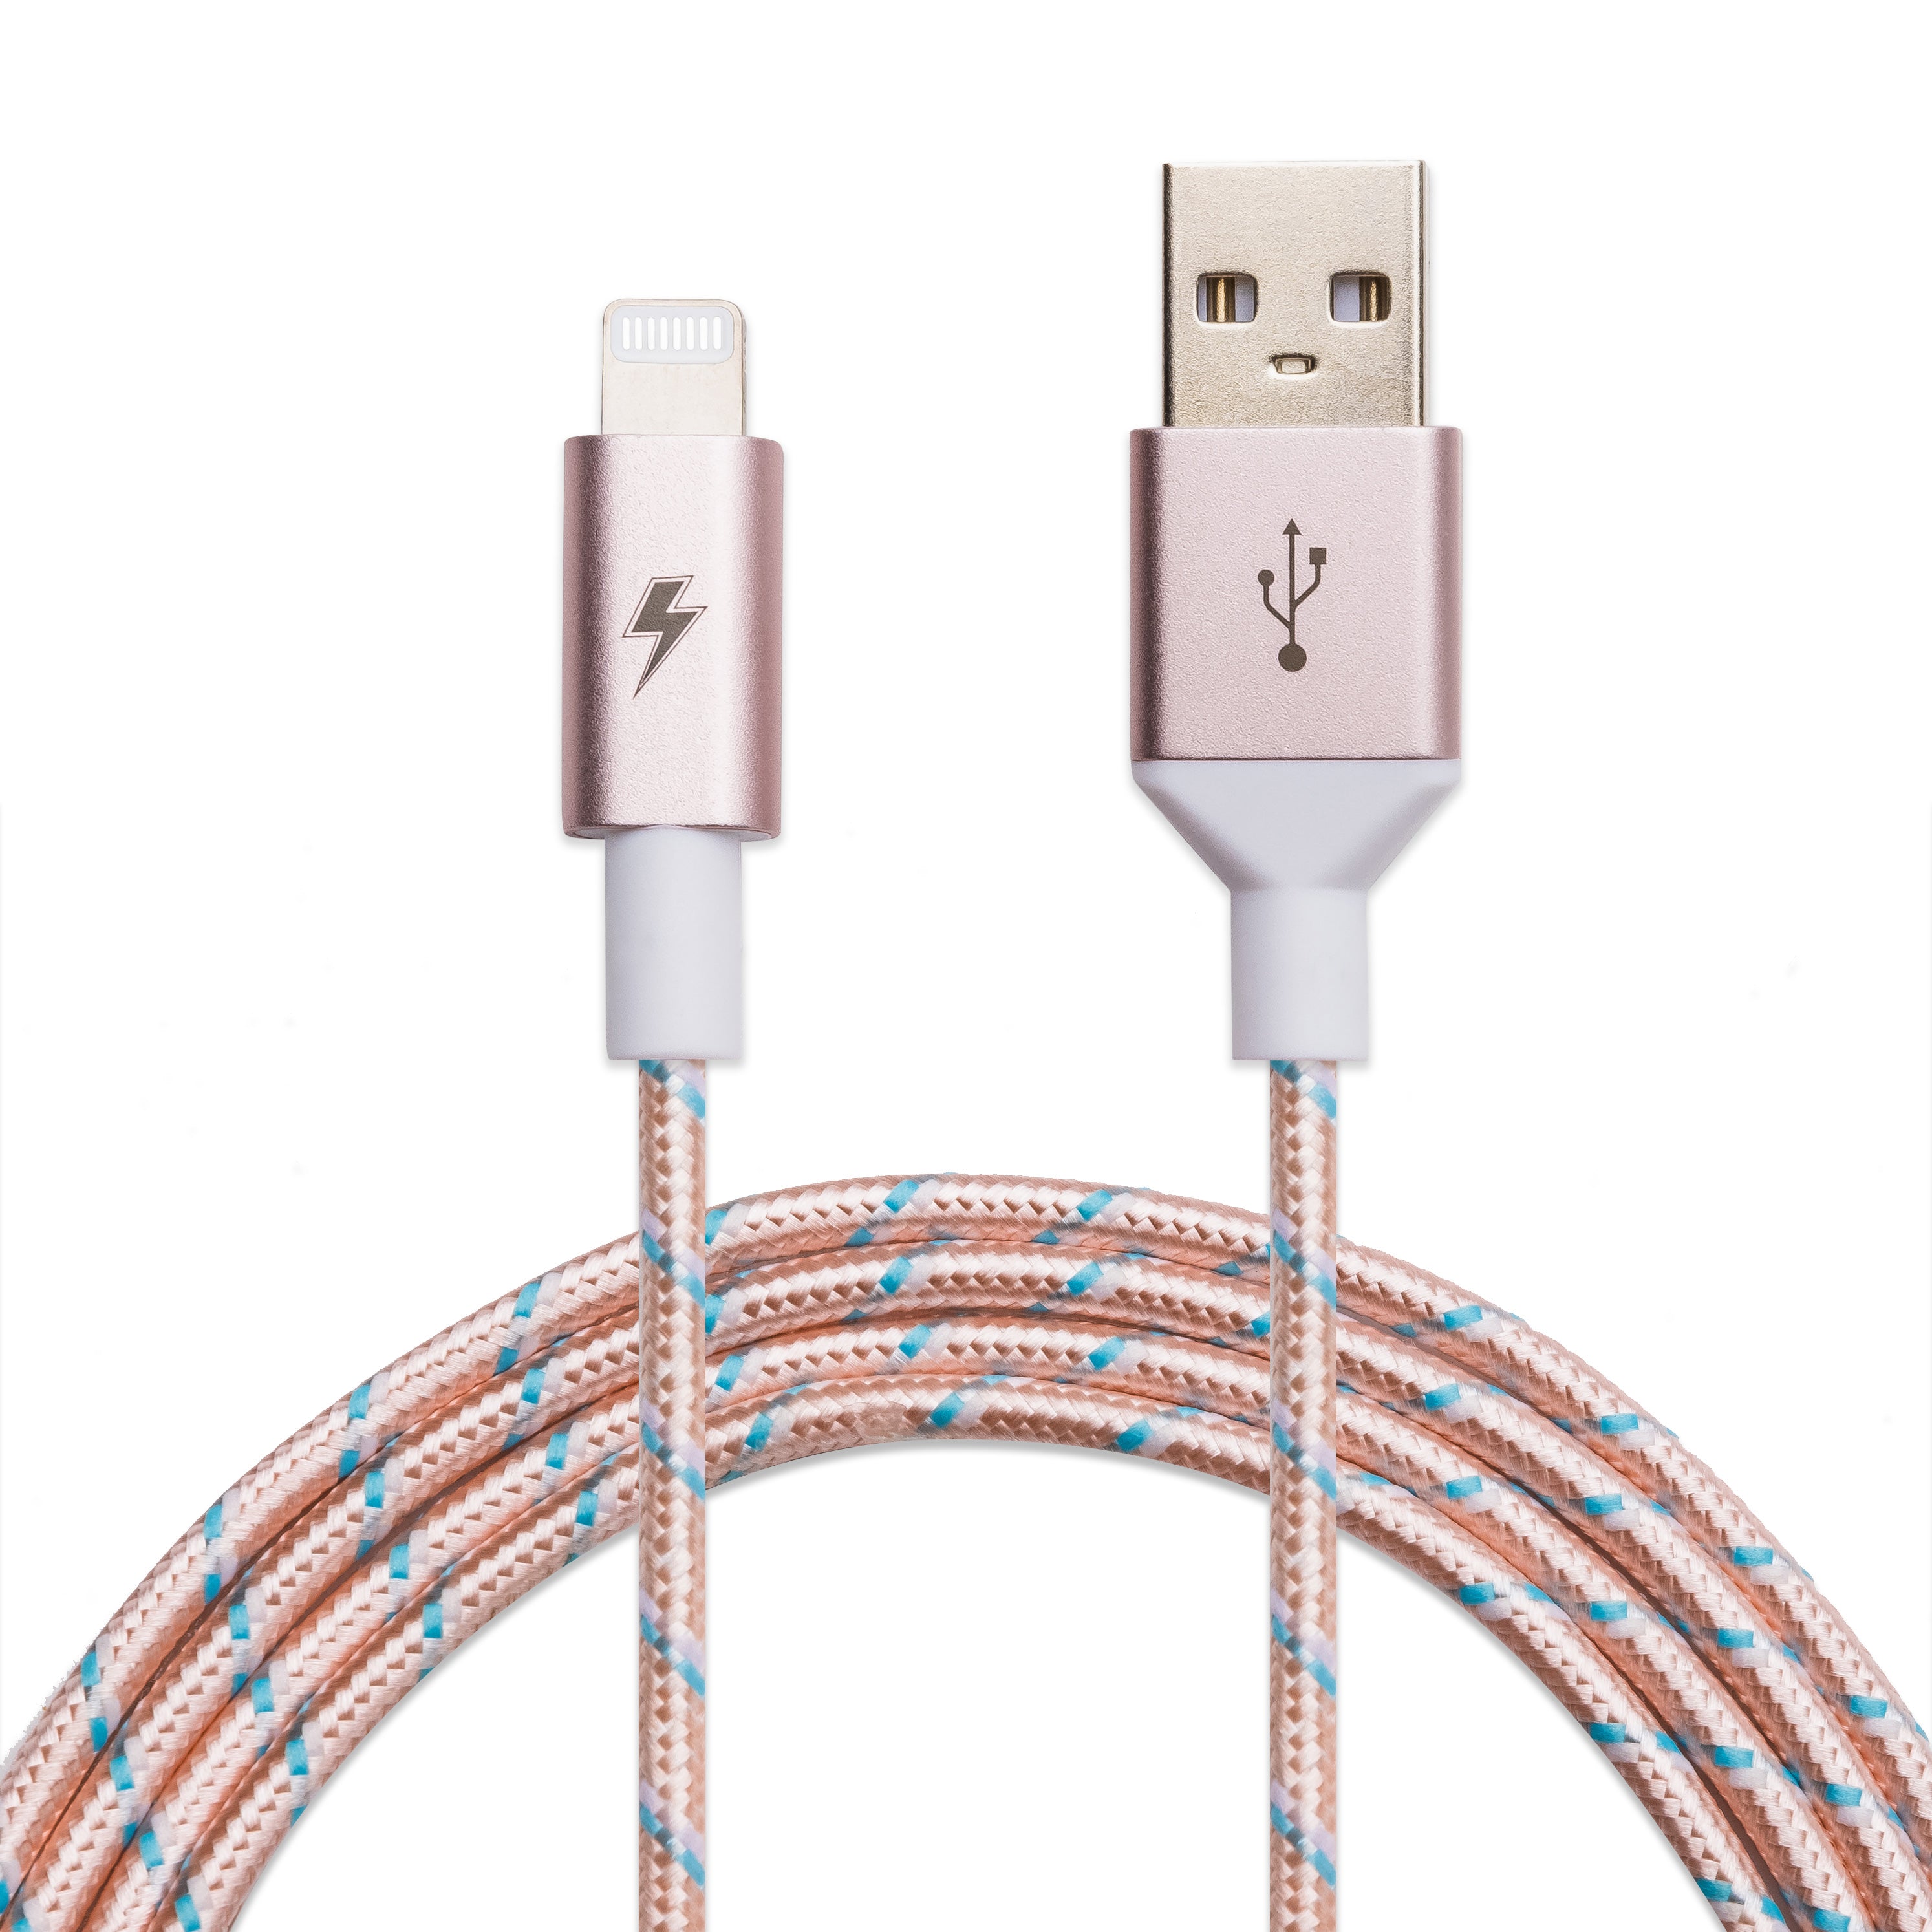 Rainbow Lightning Cable [10 ft / 3m length] – Charge Cords